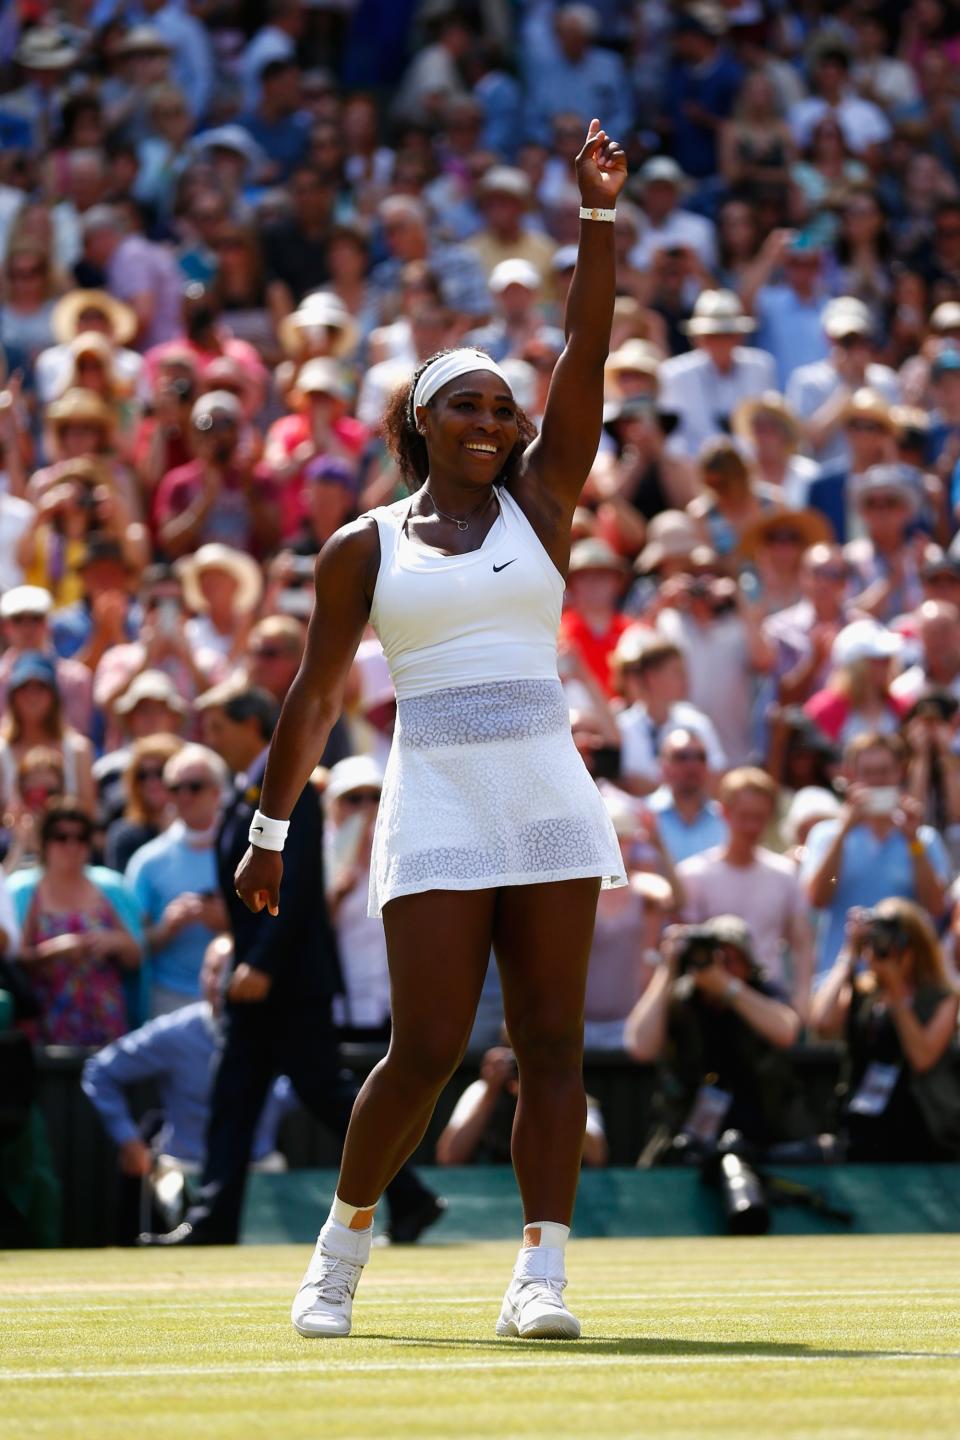 serena williams wimbledon fashion outfits and looks, LONDON, ENGLAND - JULY 11: Serena Williams of United States celebrates after winning the Final of the Ladies Singles against Garbine Muguruza of Spain during the day twelve of the Wimbledon Lawn Tennis Championships at the All England Lawn Tennis and Croquet Club on July 11, 2015 in London, England. (Photo by Julian Finney/Getty Images)